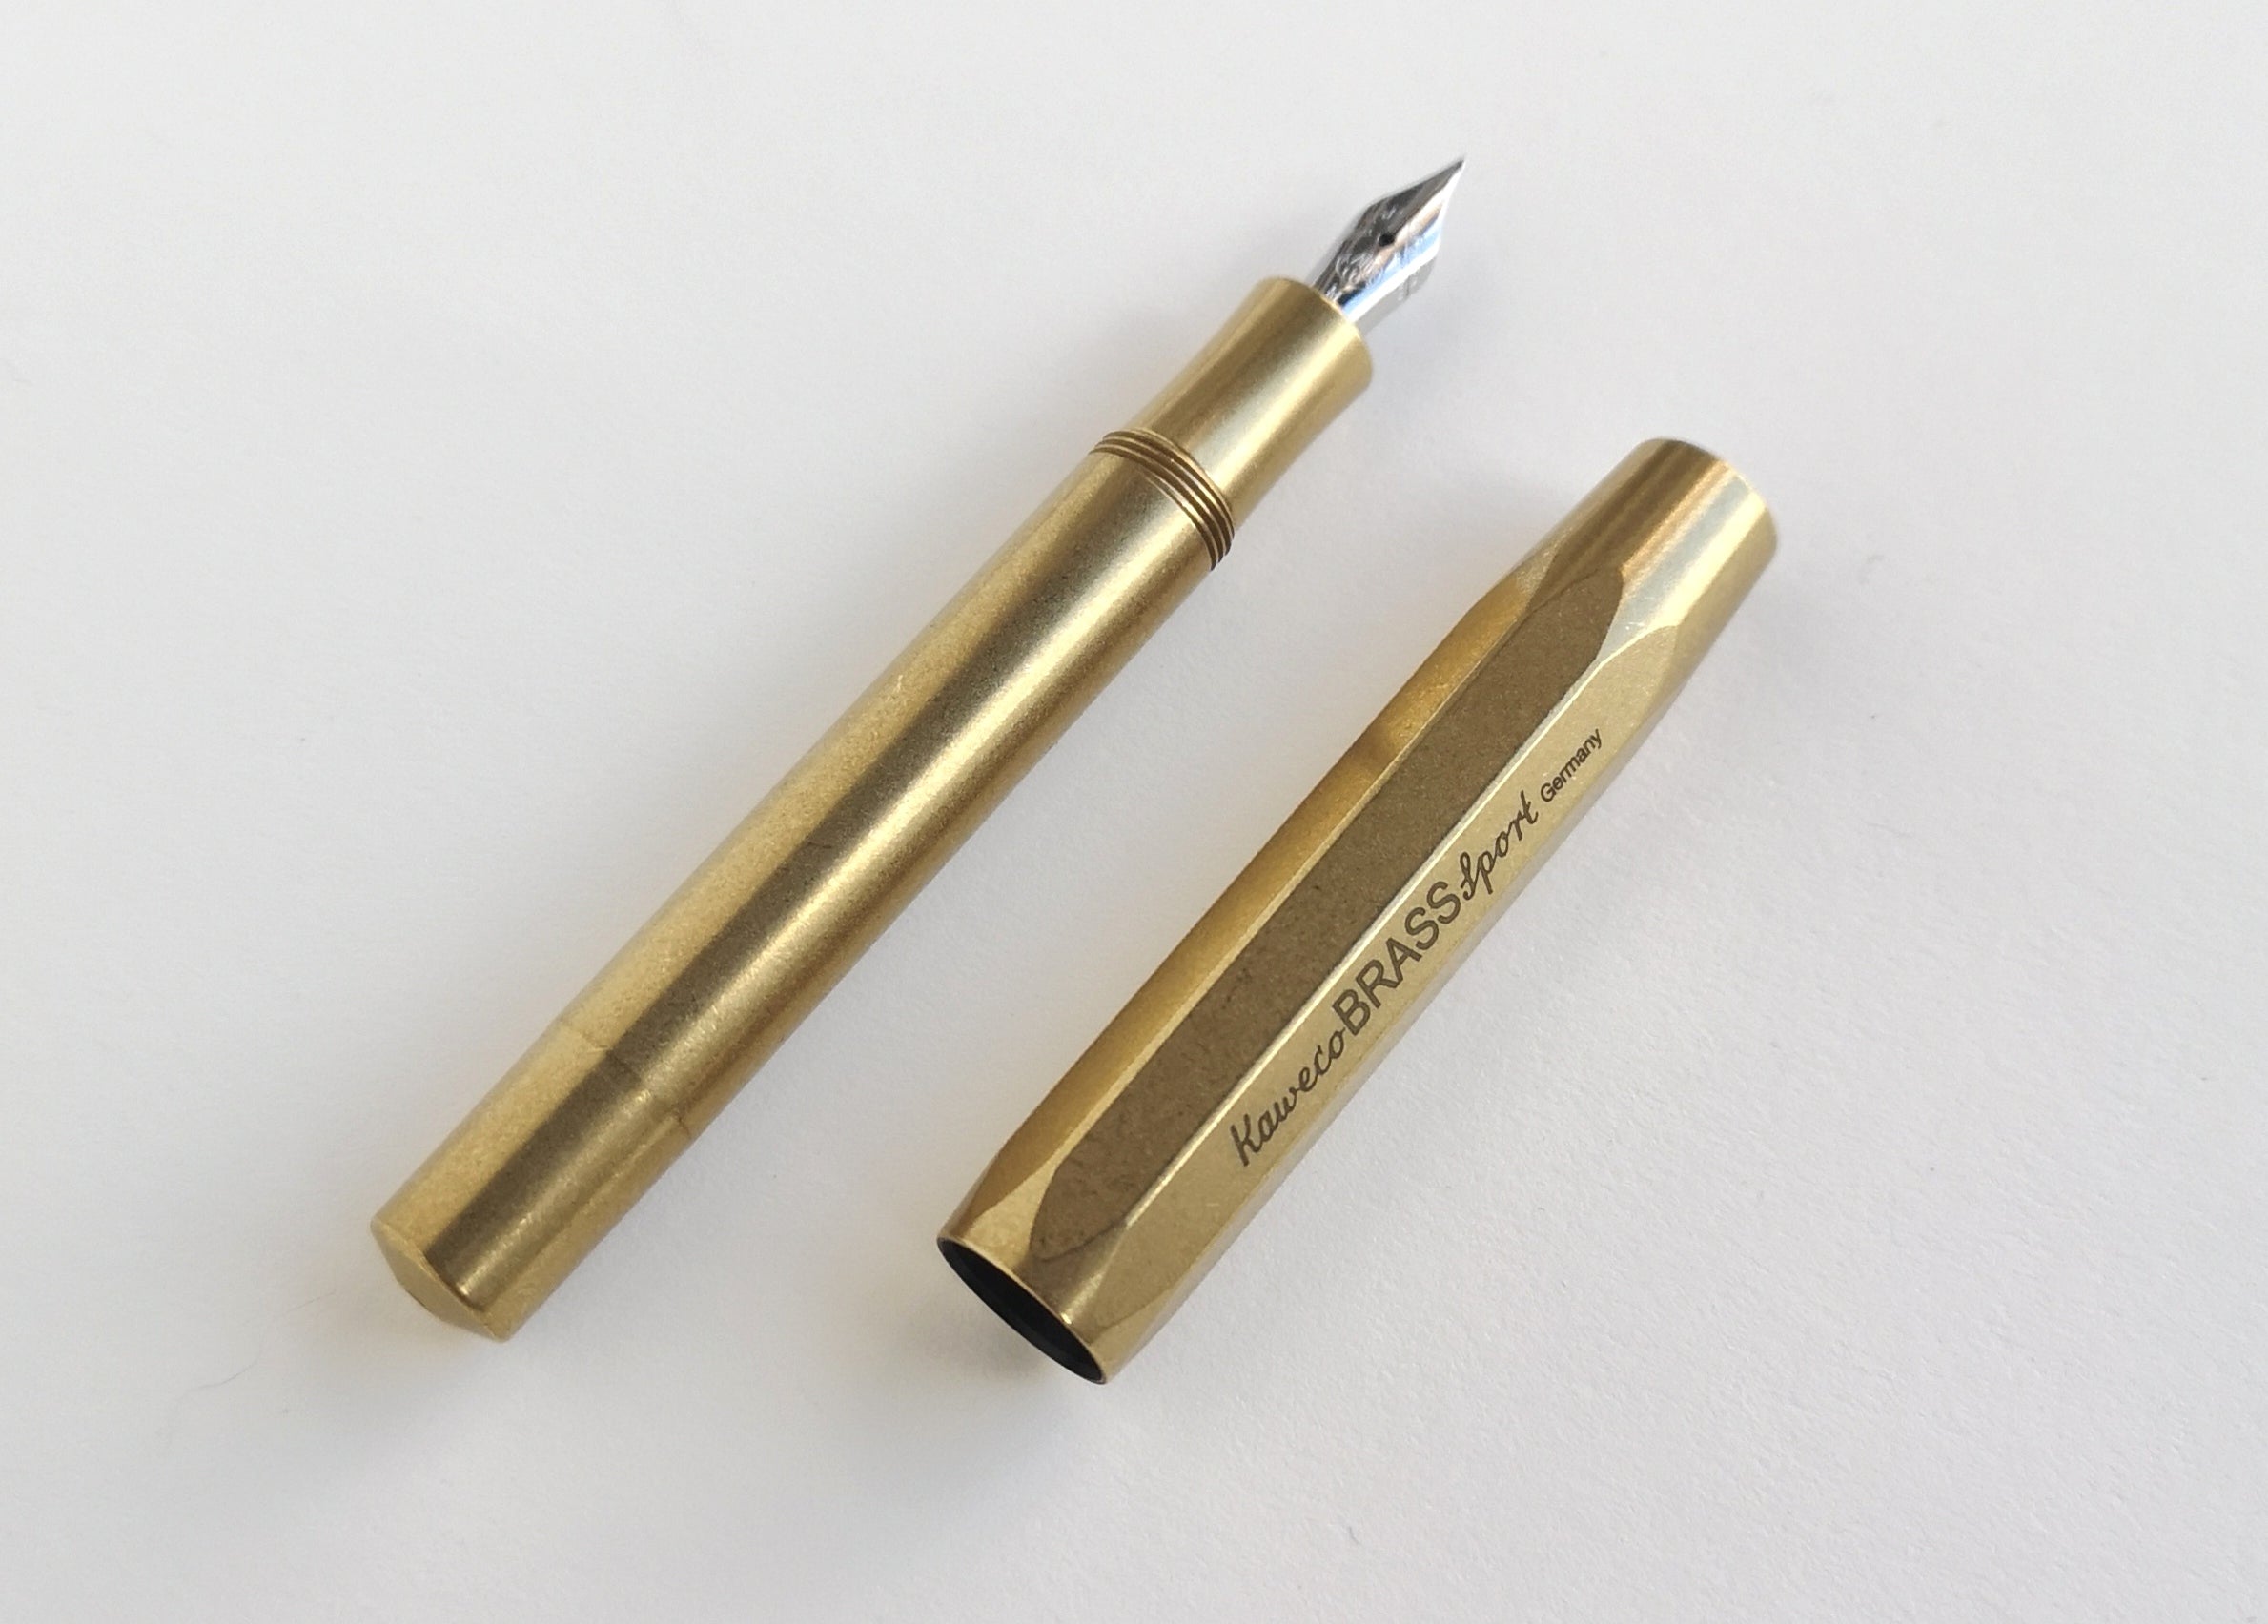 Brass Kaweco Sport Fountain Pen with cap on side